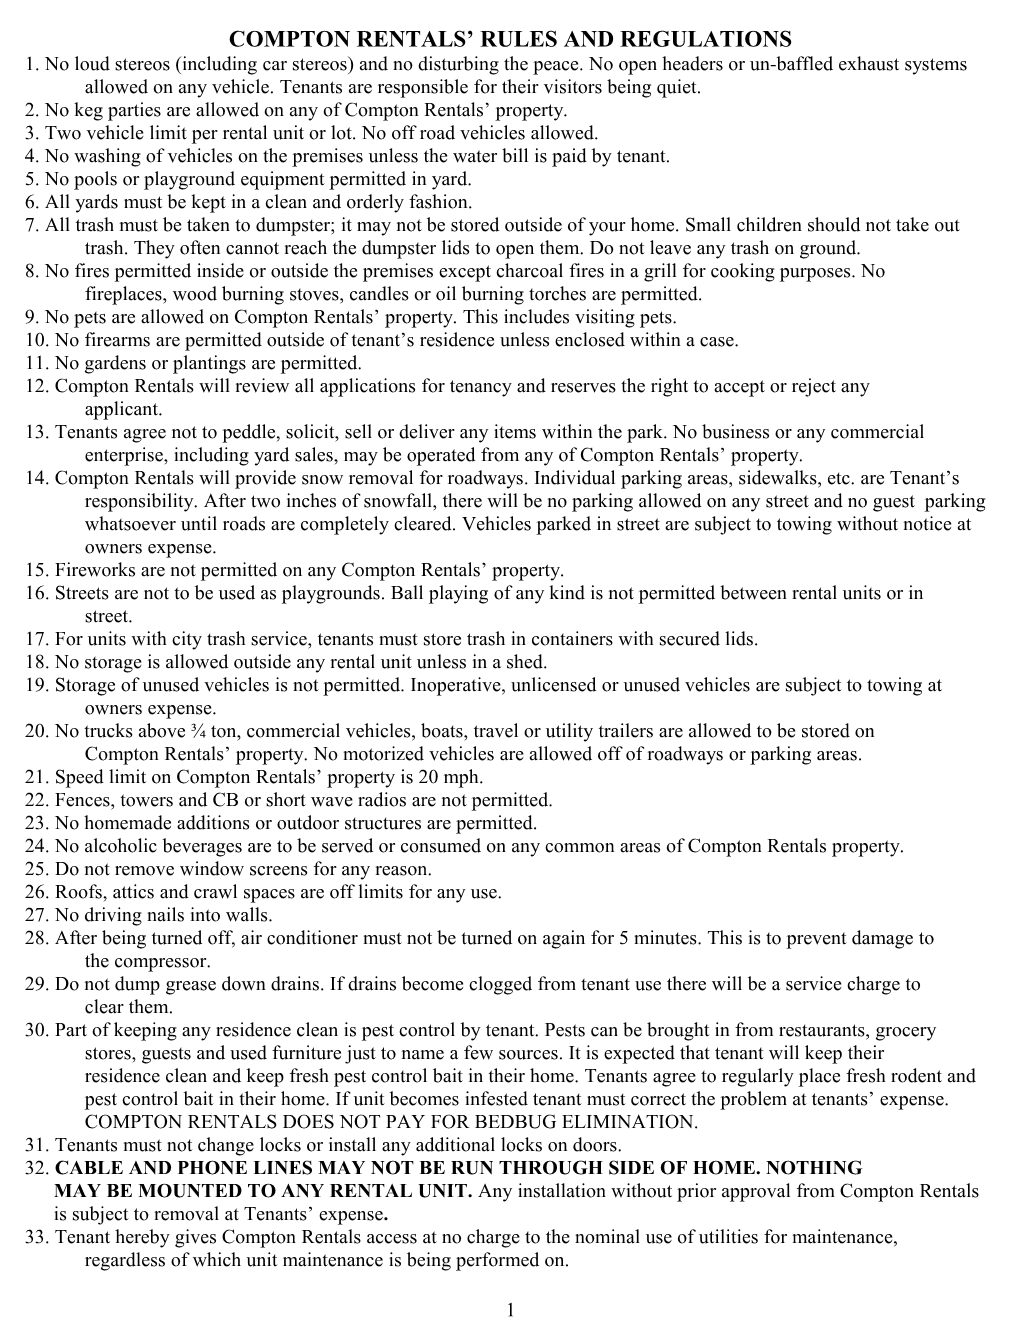 Compton Rentals Rules and Regulations s1